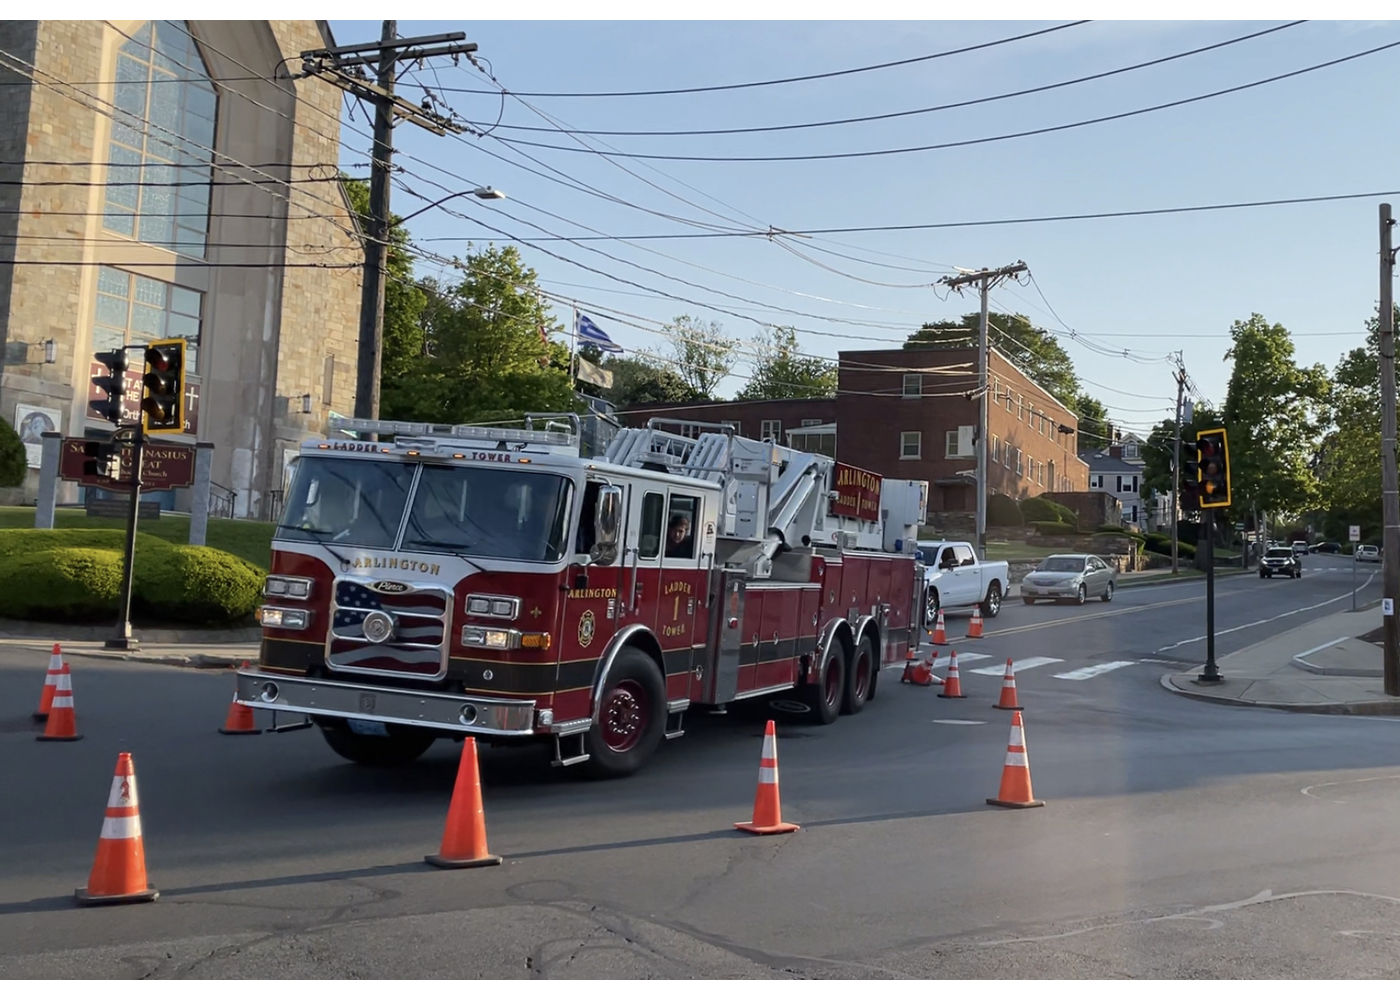 Fire truck turn test on Mass. Ave. and Appleton St. in Arlington